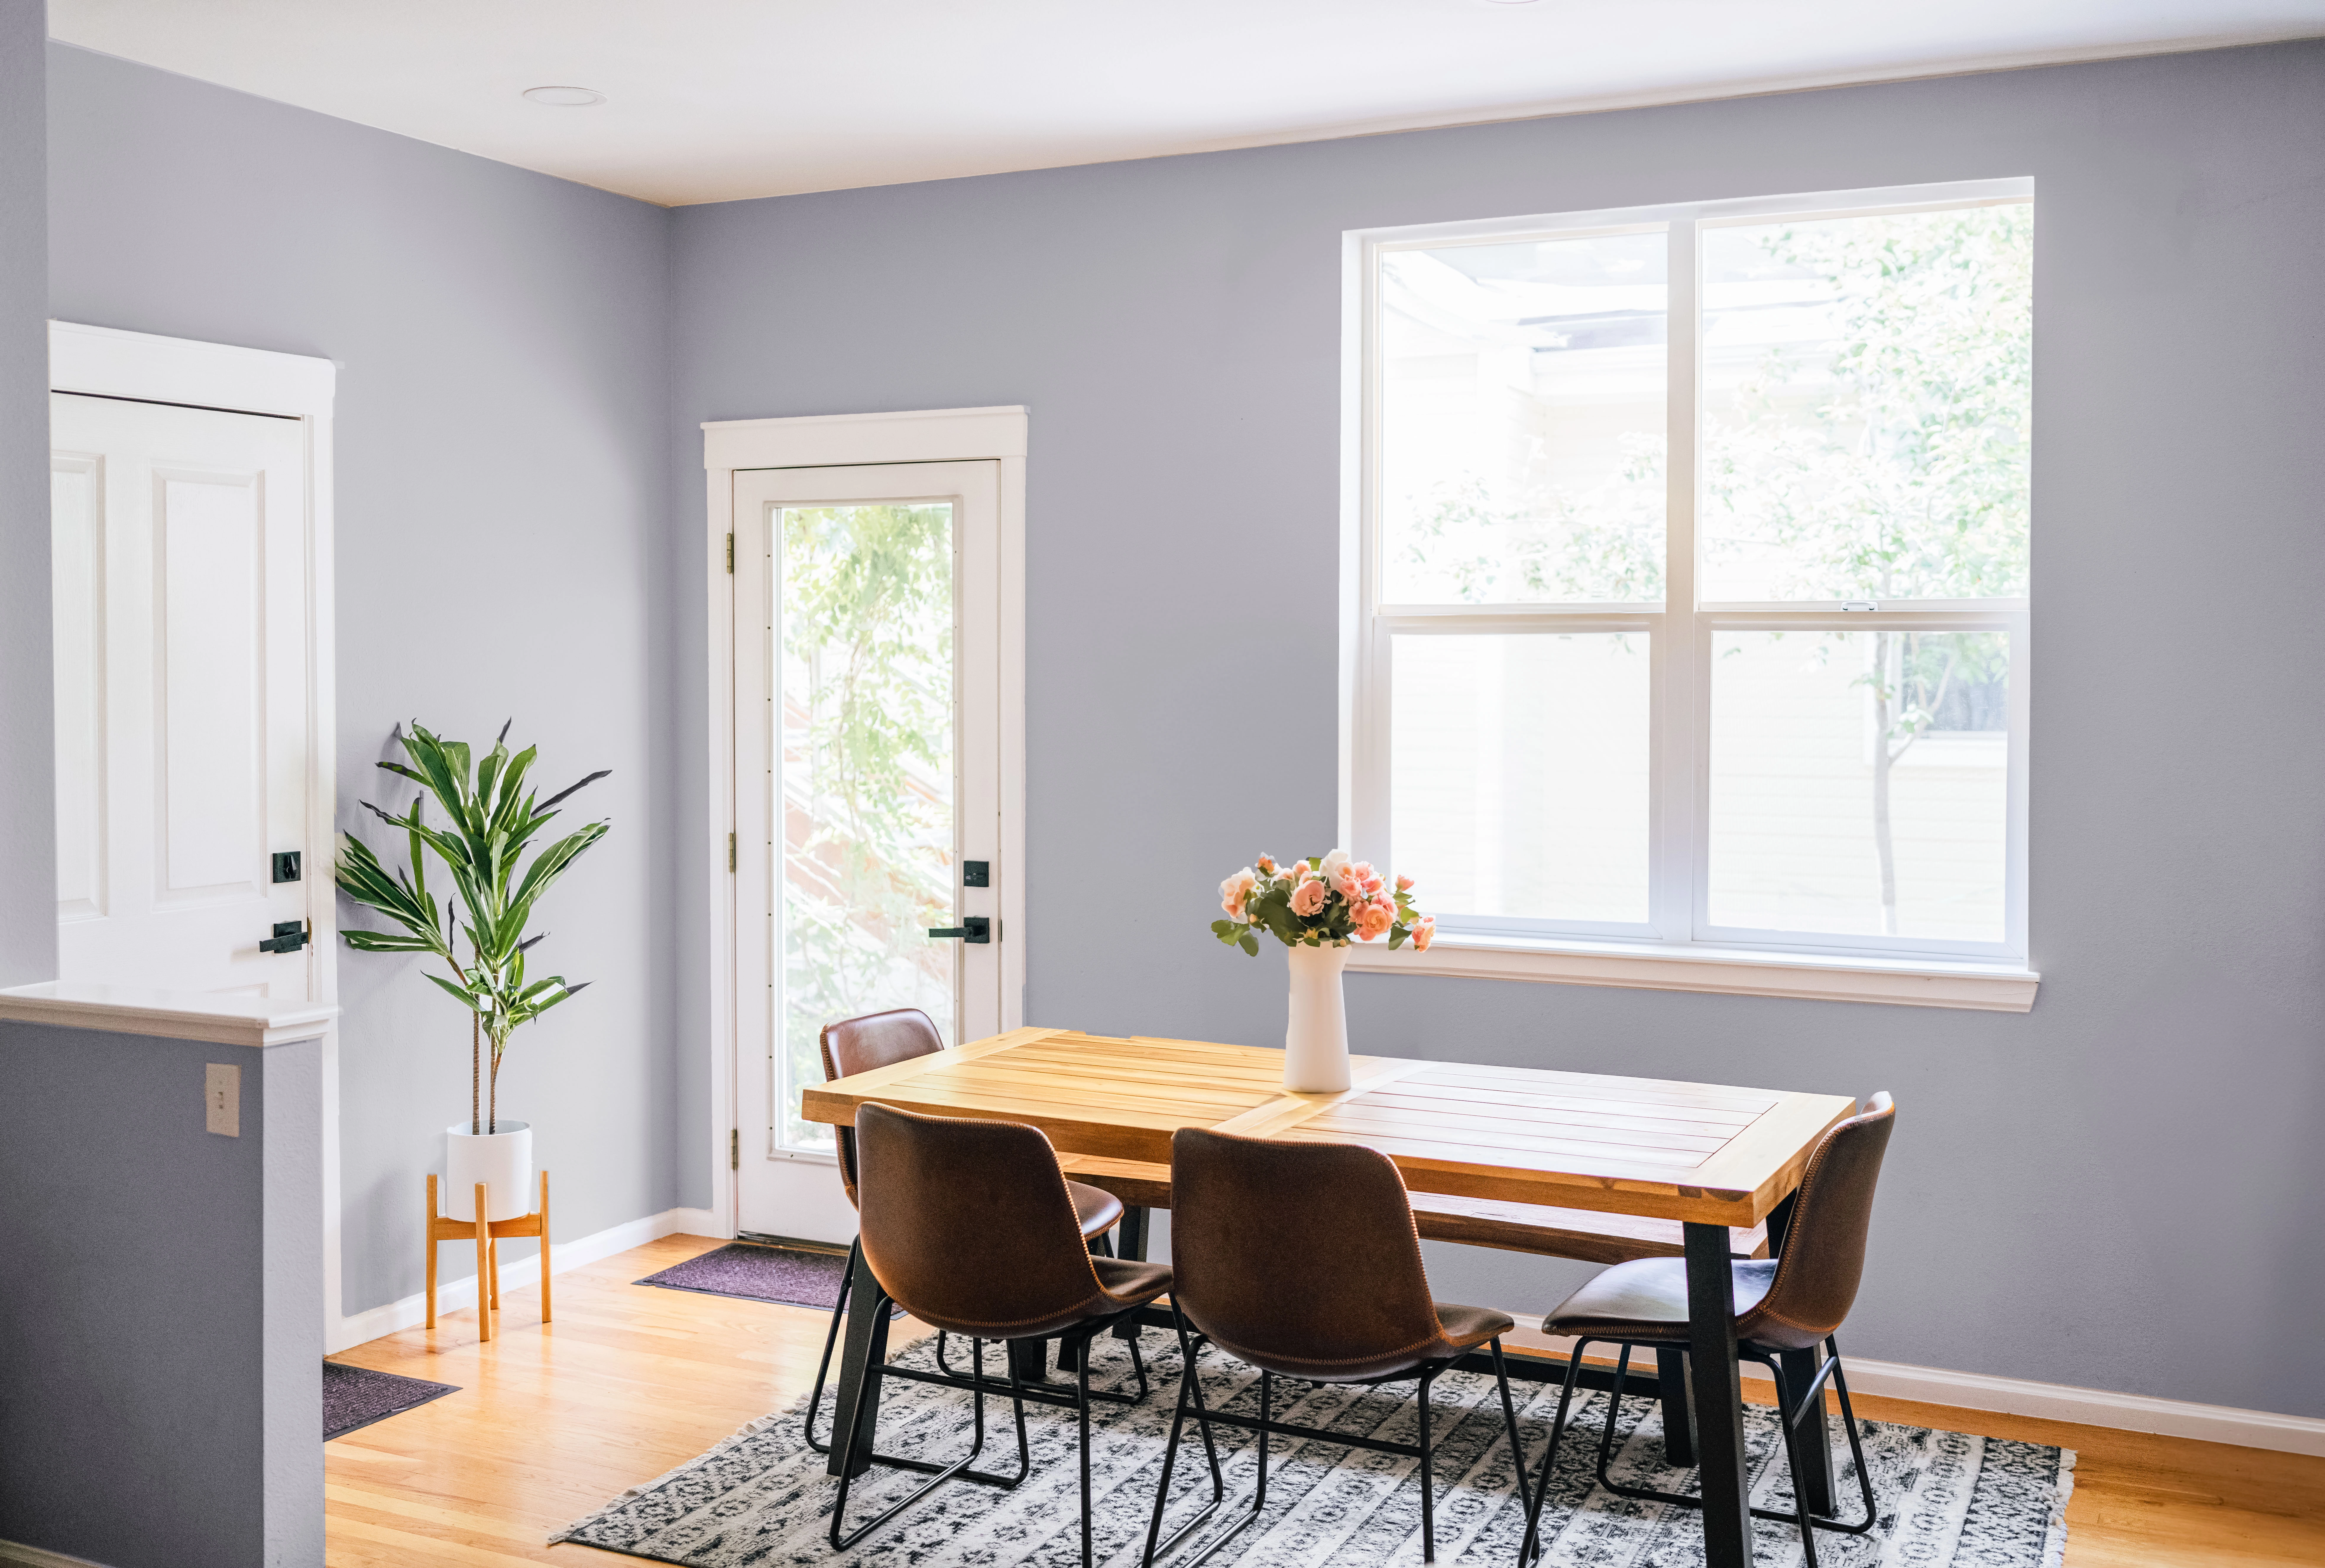 Light gray-blue painted walls and white trim inside dining room. Table and floors are light wood.